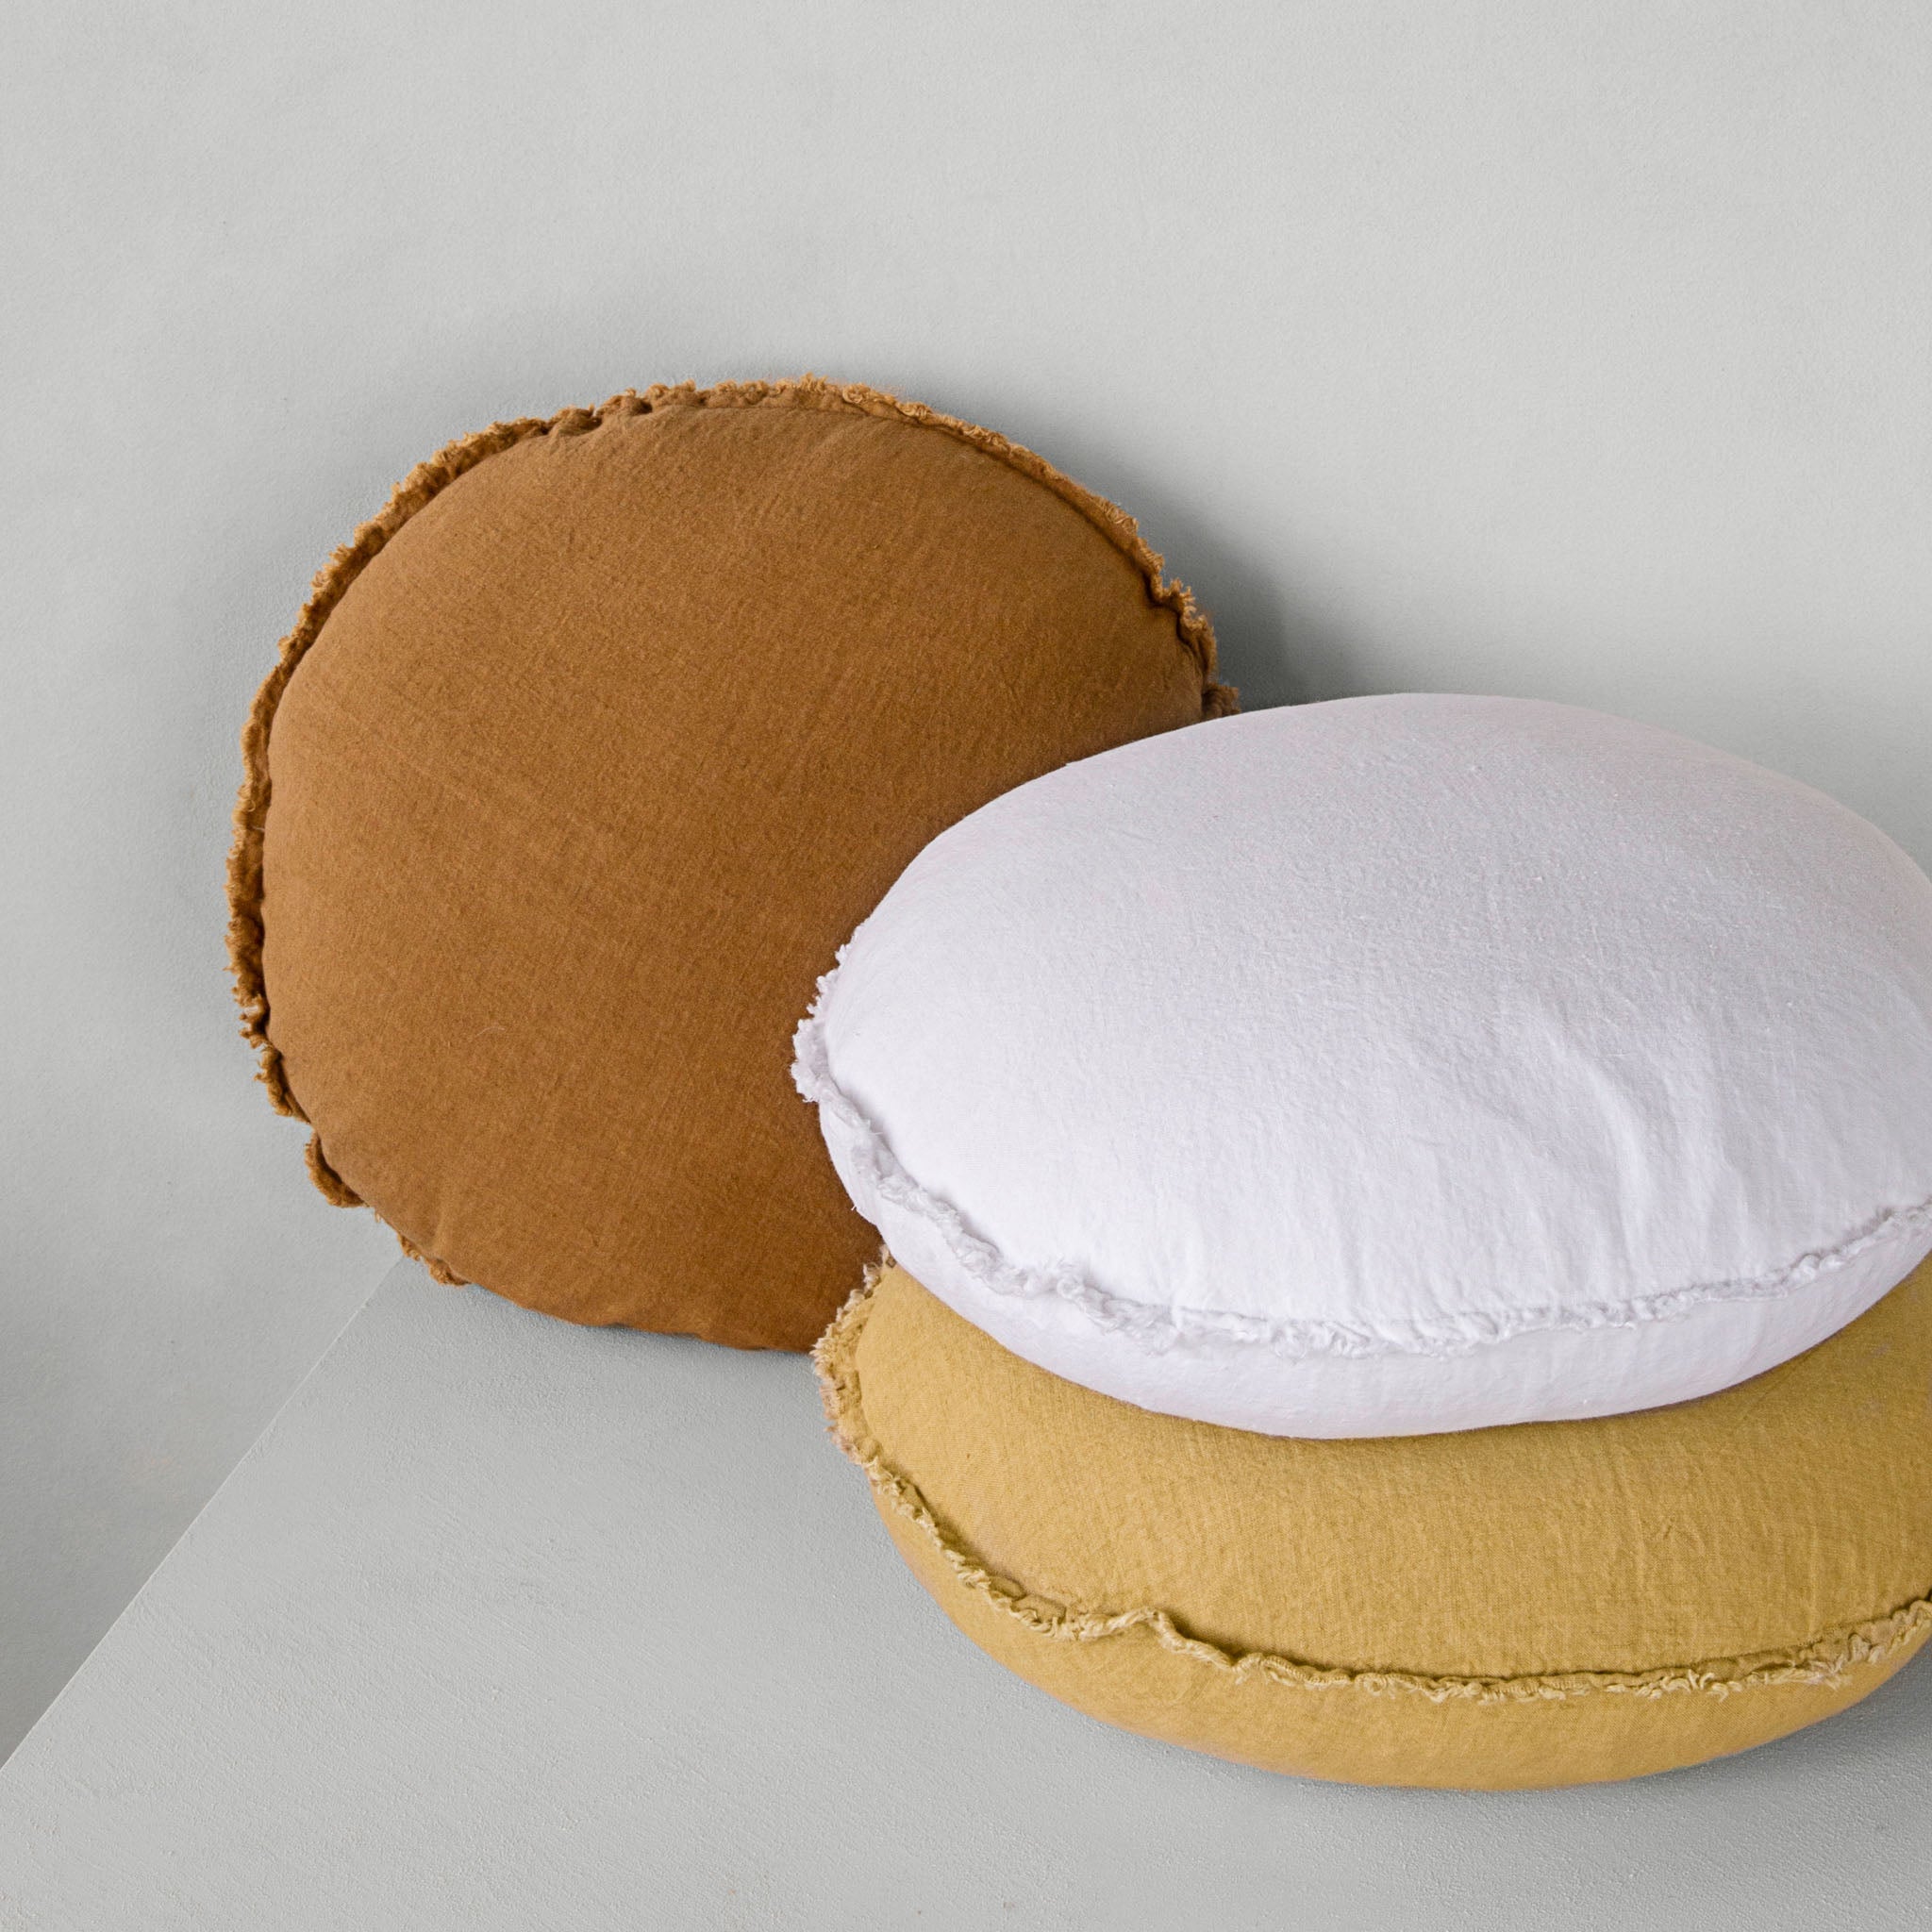 Round Linen Pillow | Muted Gold | Hale Mercantile Co.